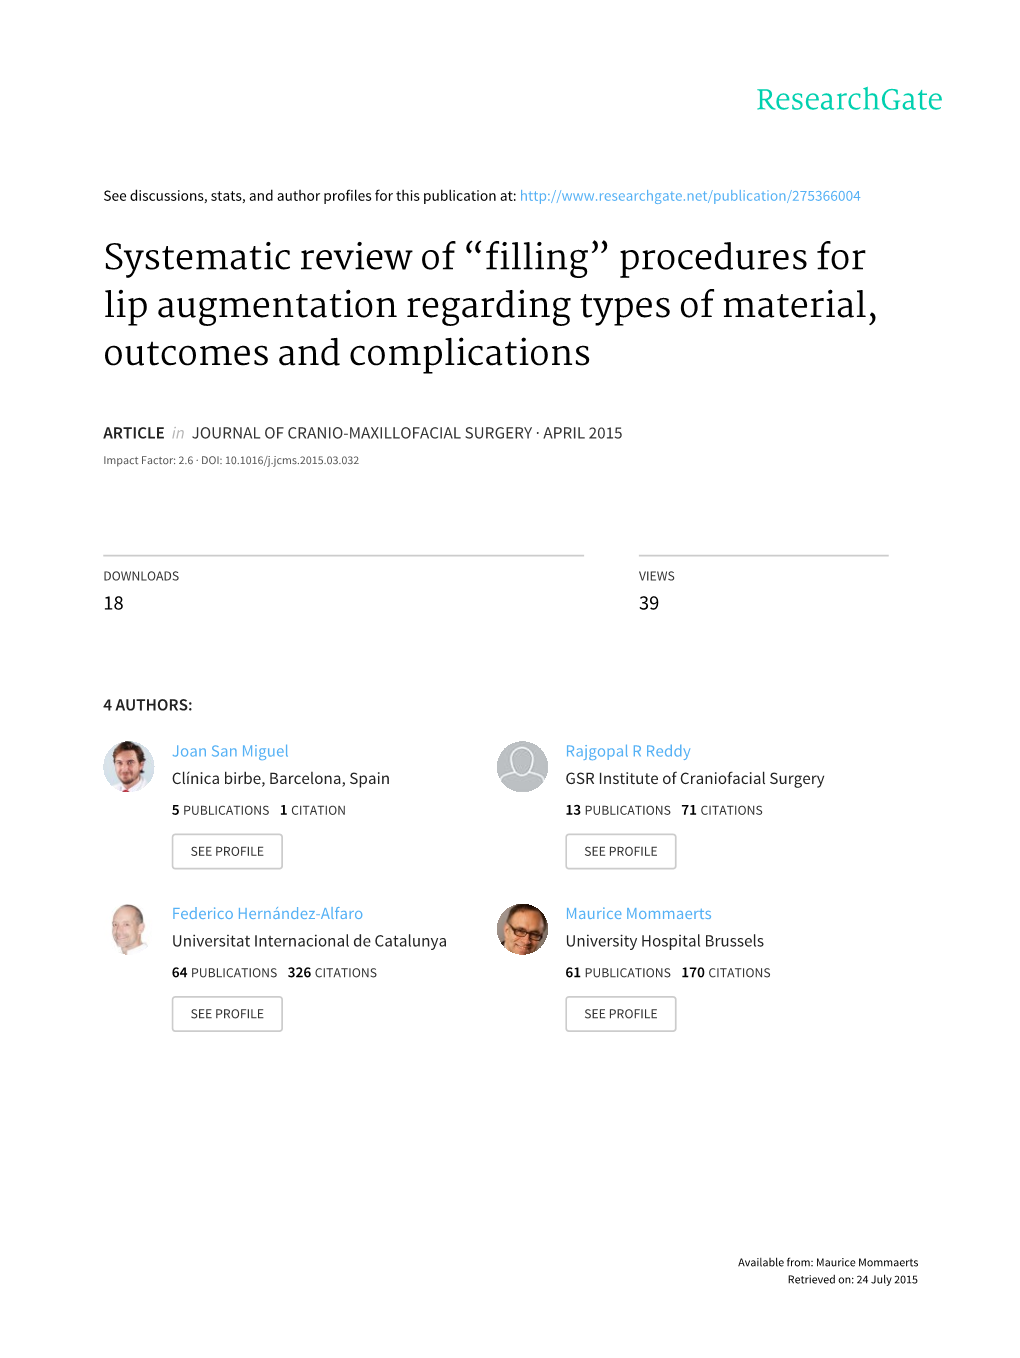 Systematic Review of “Filling” Procedures for Lip Augmentation Regarding Types of Material, Outcomes and Complications